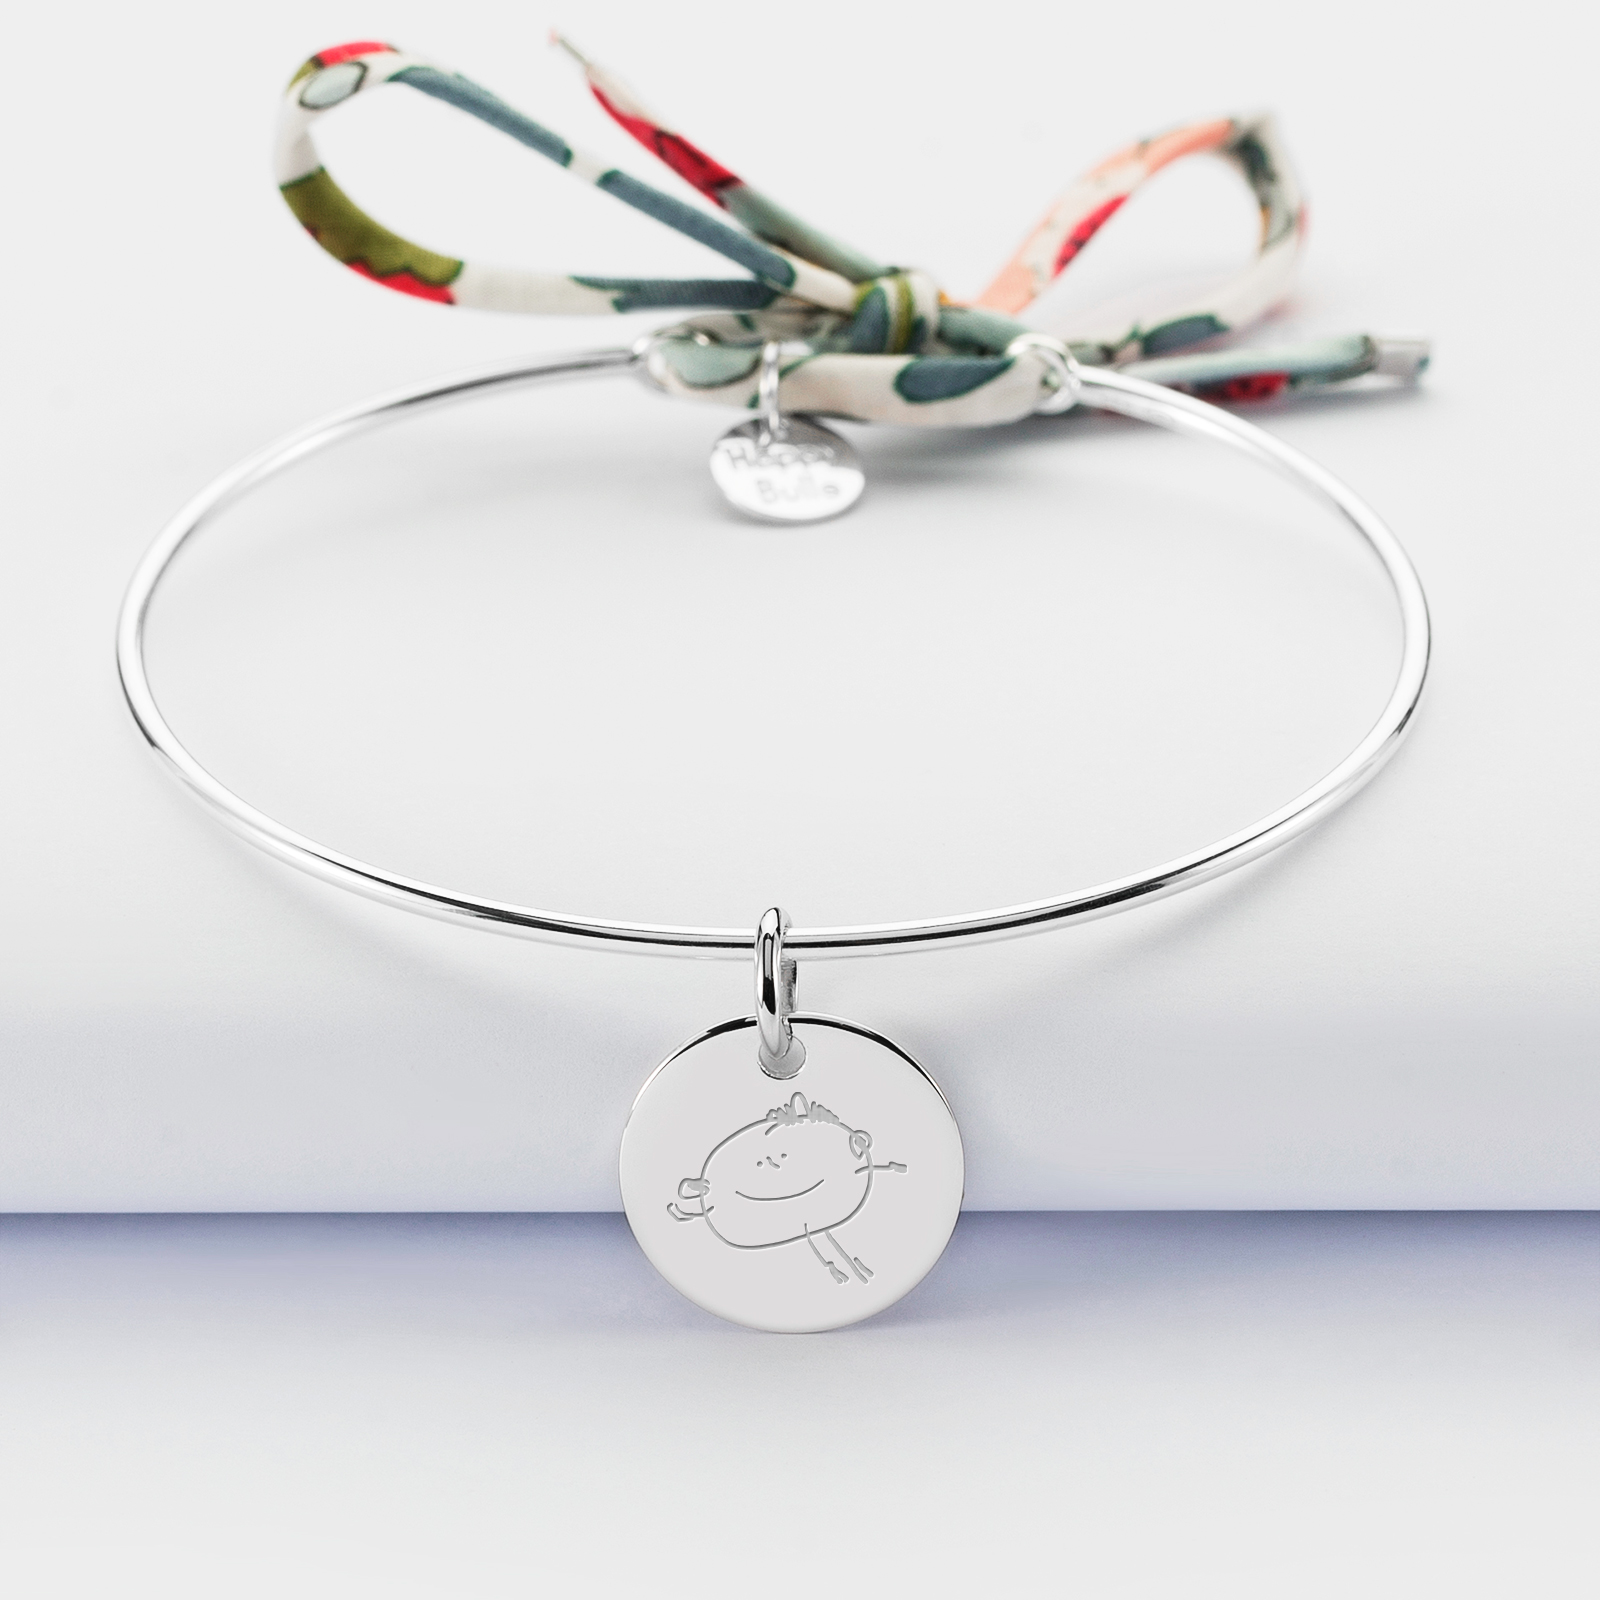 Personalised silver and sparkly cord bangle bracelet and 15 mm engraved medallion - sketch